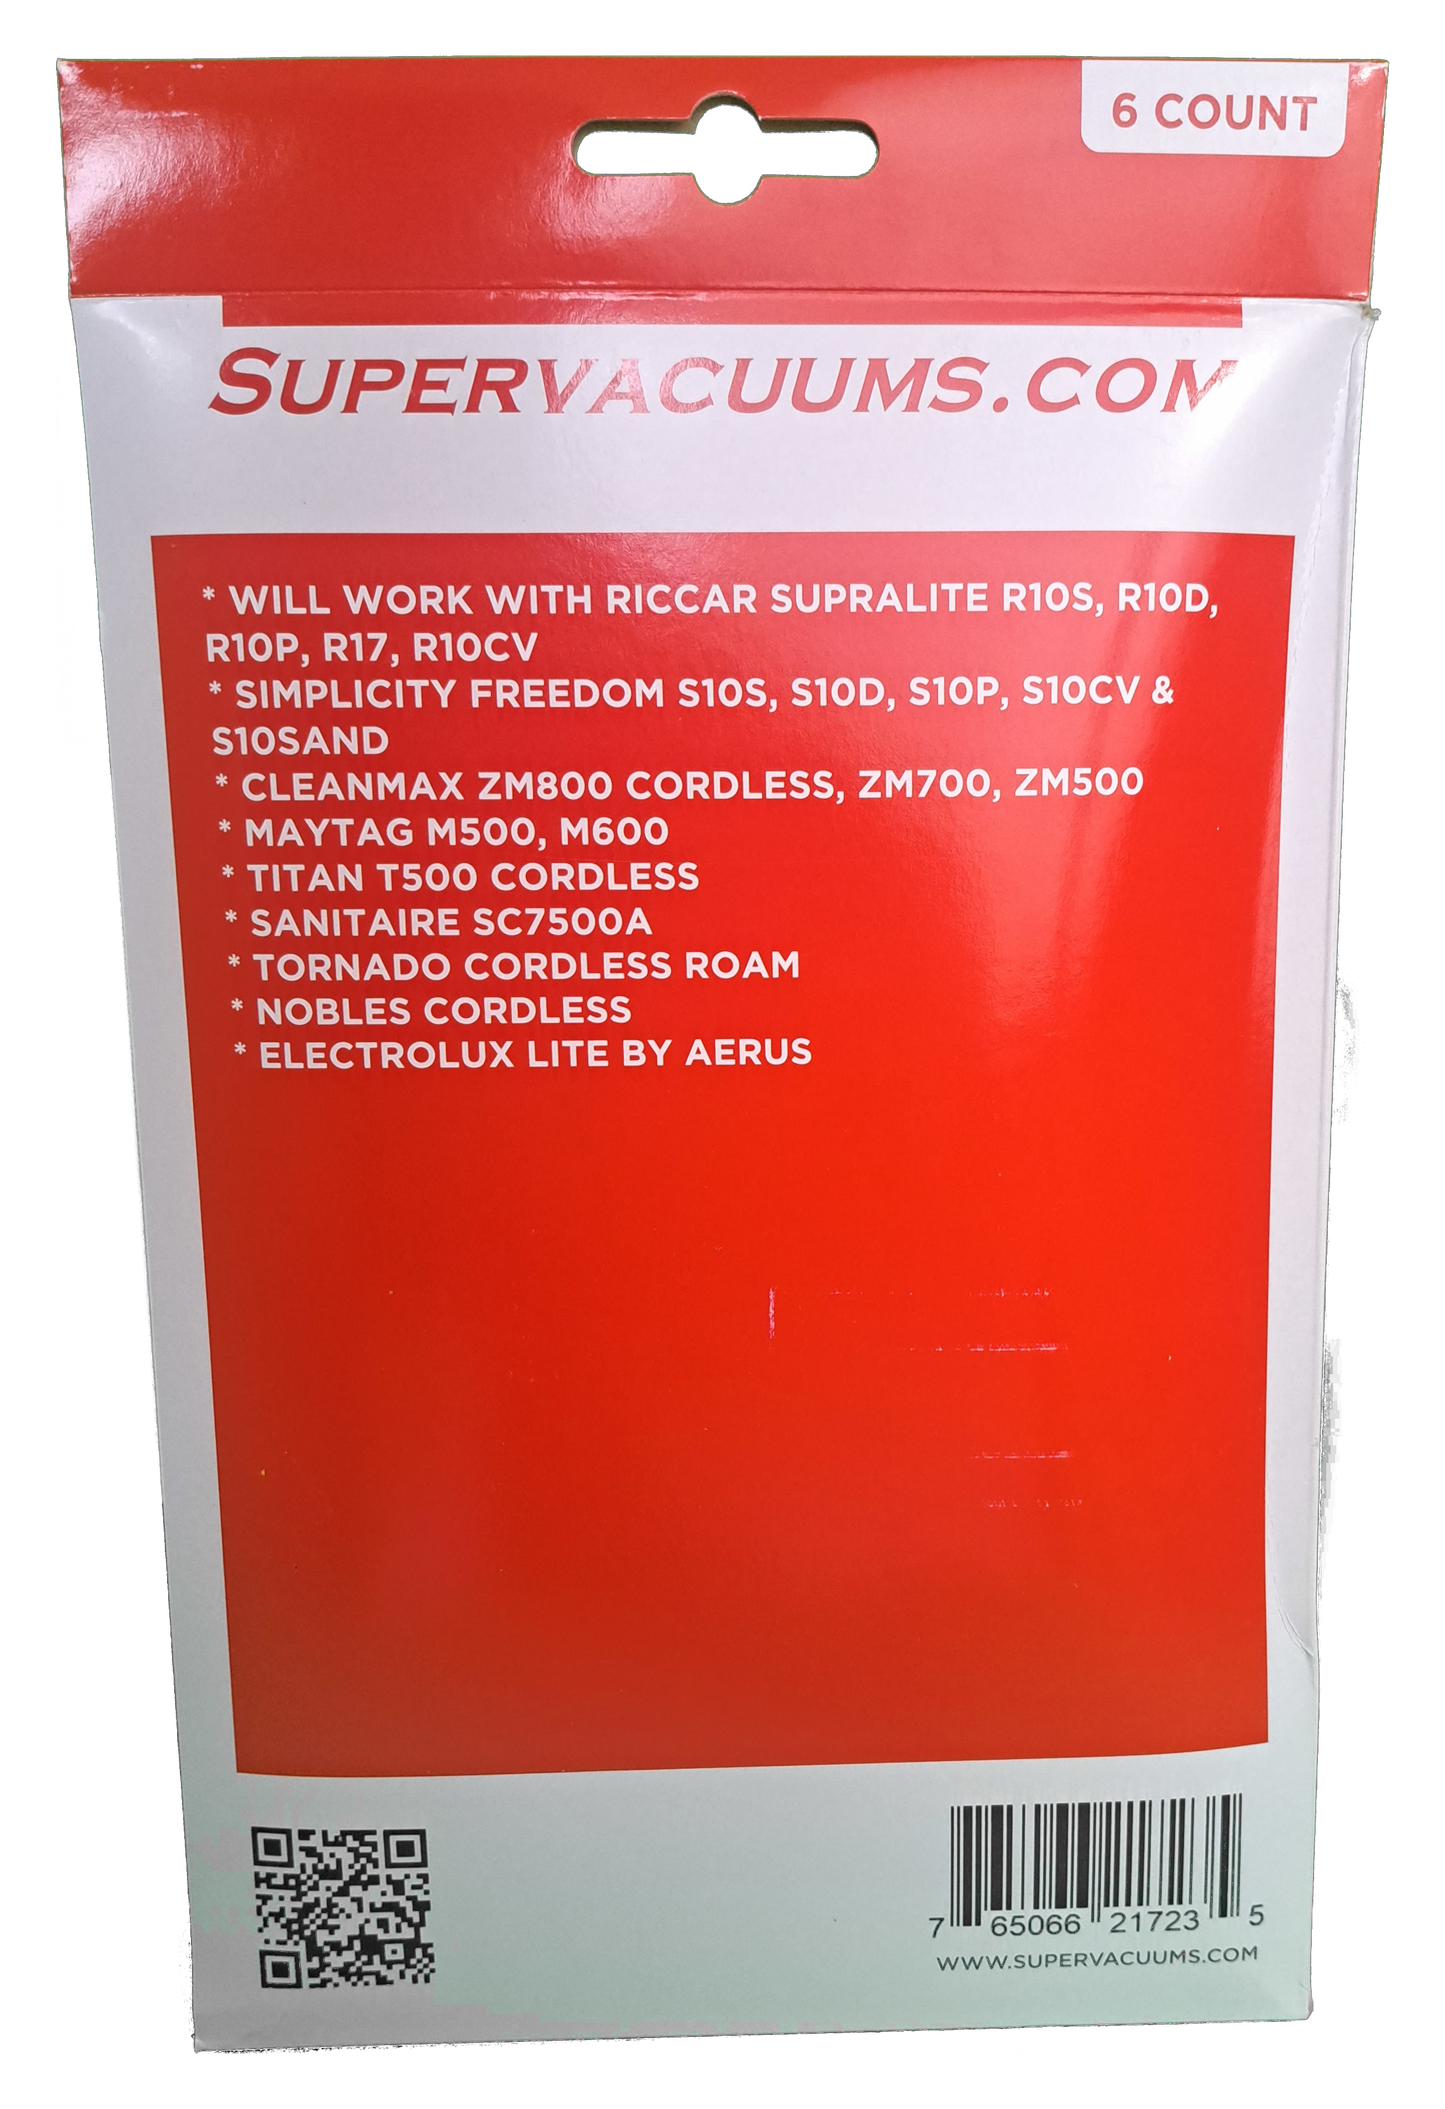 Supervacuums Deluxe Hepa Vacuum Bags for Riccar Supralite R10S, R10D, R10P, & R10SAND